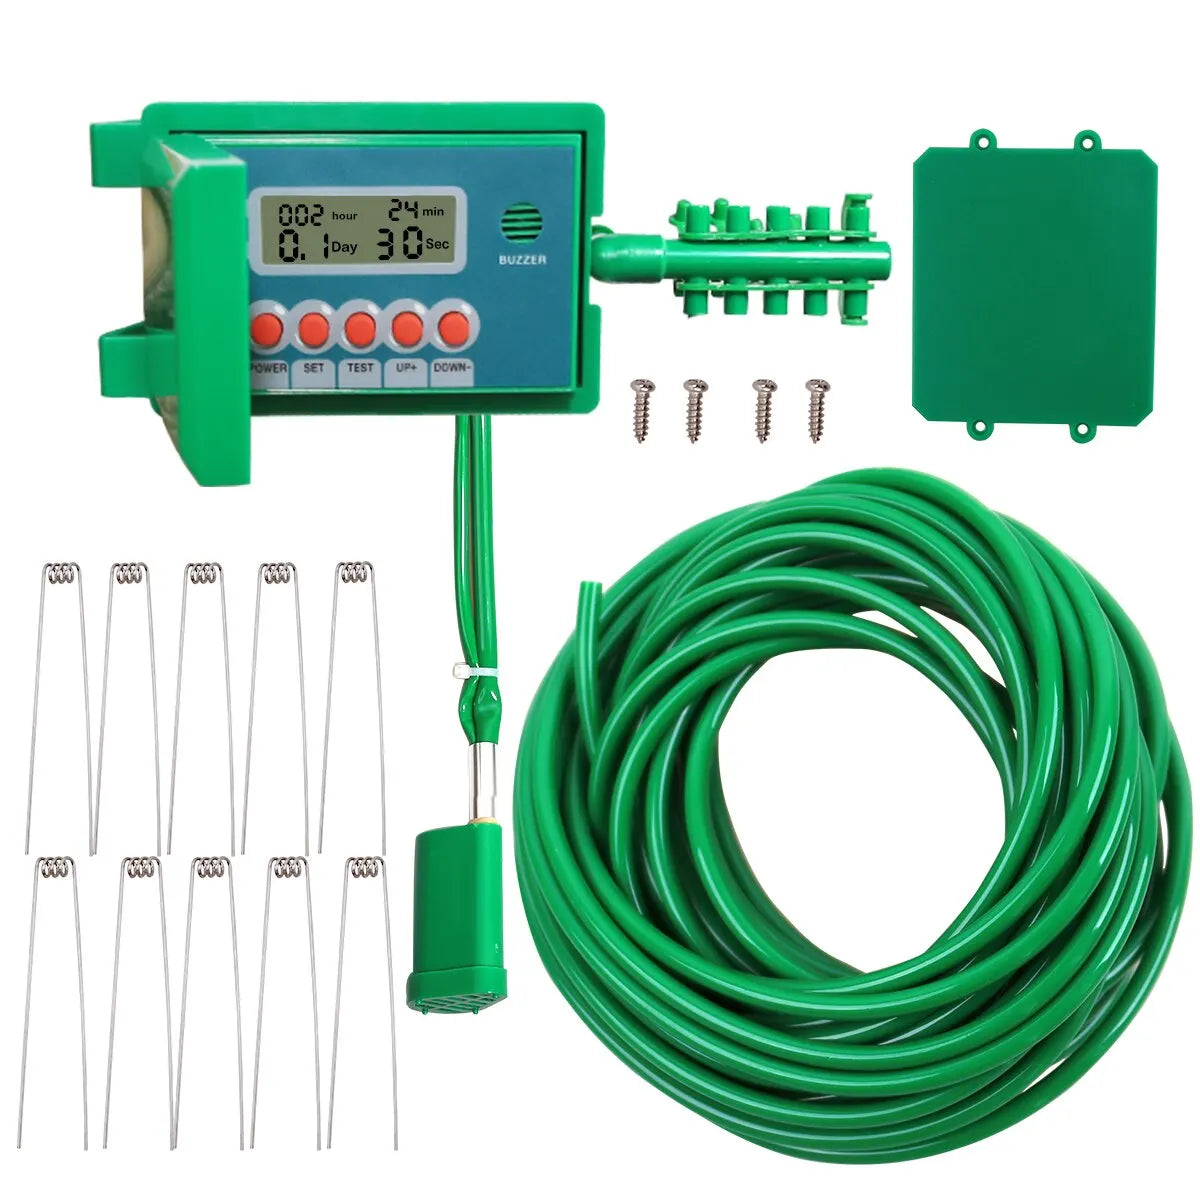 Automatic Micro Home Drip Irrigation Watering Kits System Sprinkler with Smart Controller for Garden,Bonsai Indoor Use